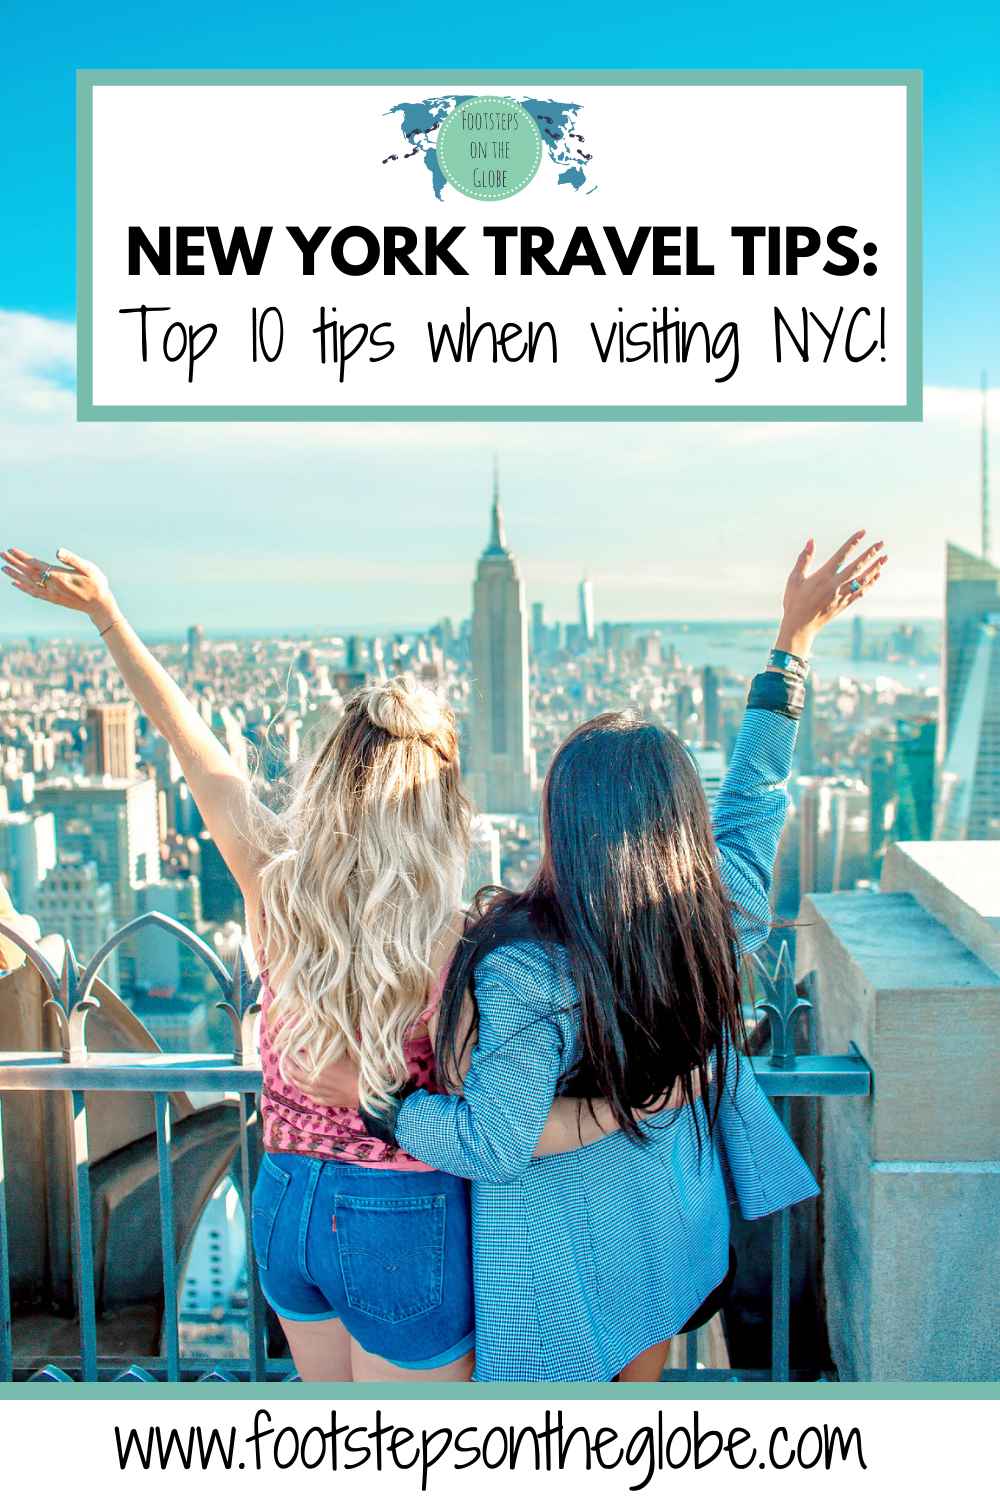 A blonde girl and brunette girl with one arm around each other and the other in the air at Top of the Rock in New York facing the Empire State Building